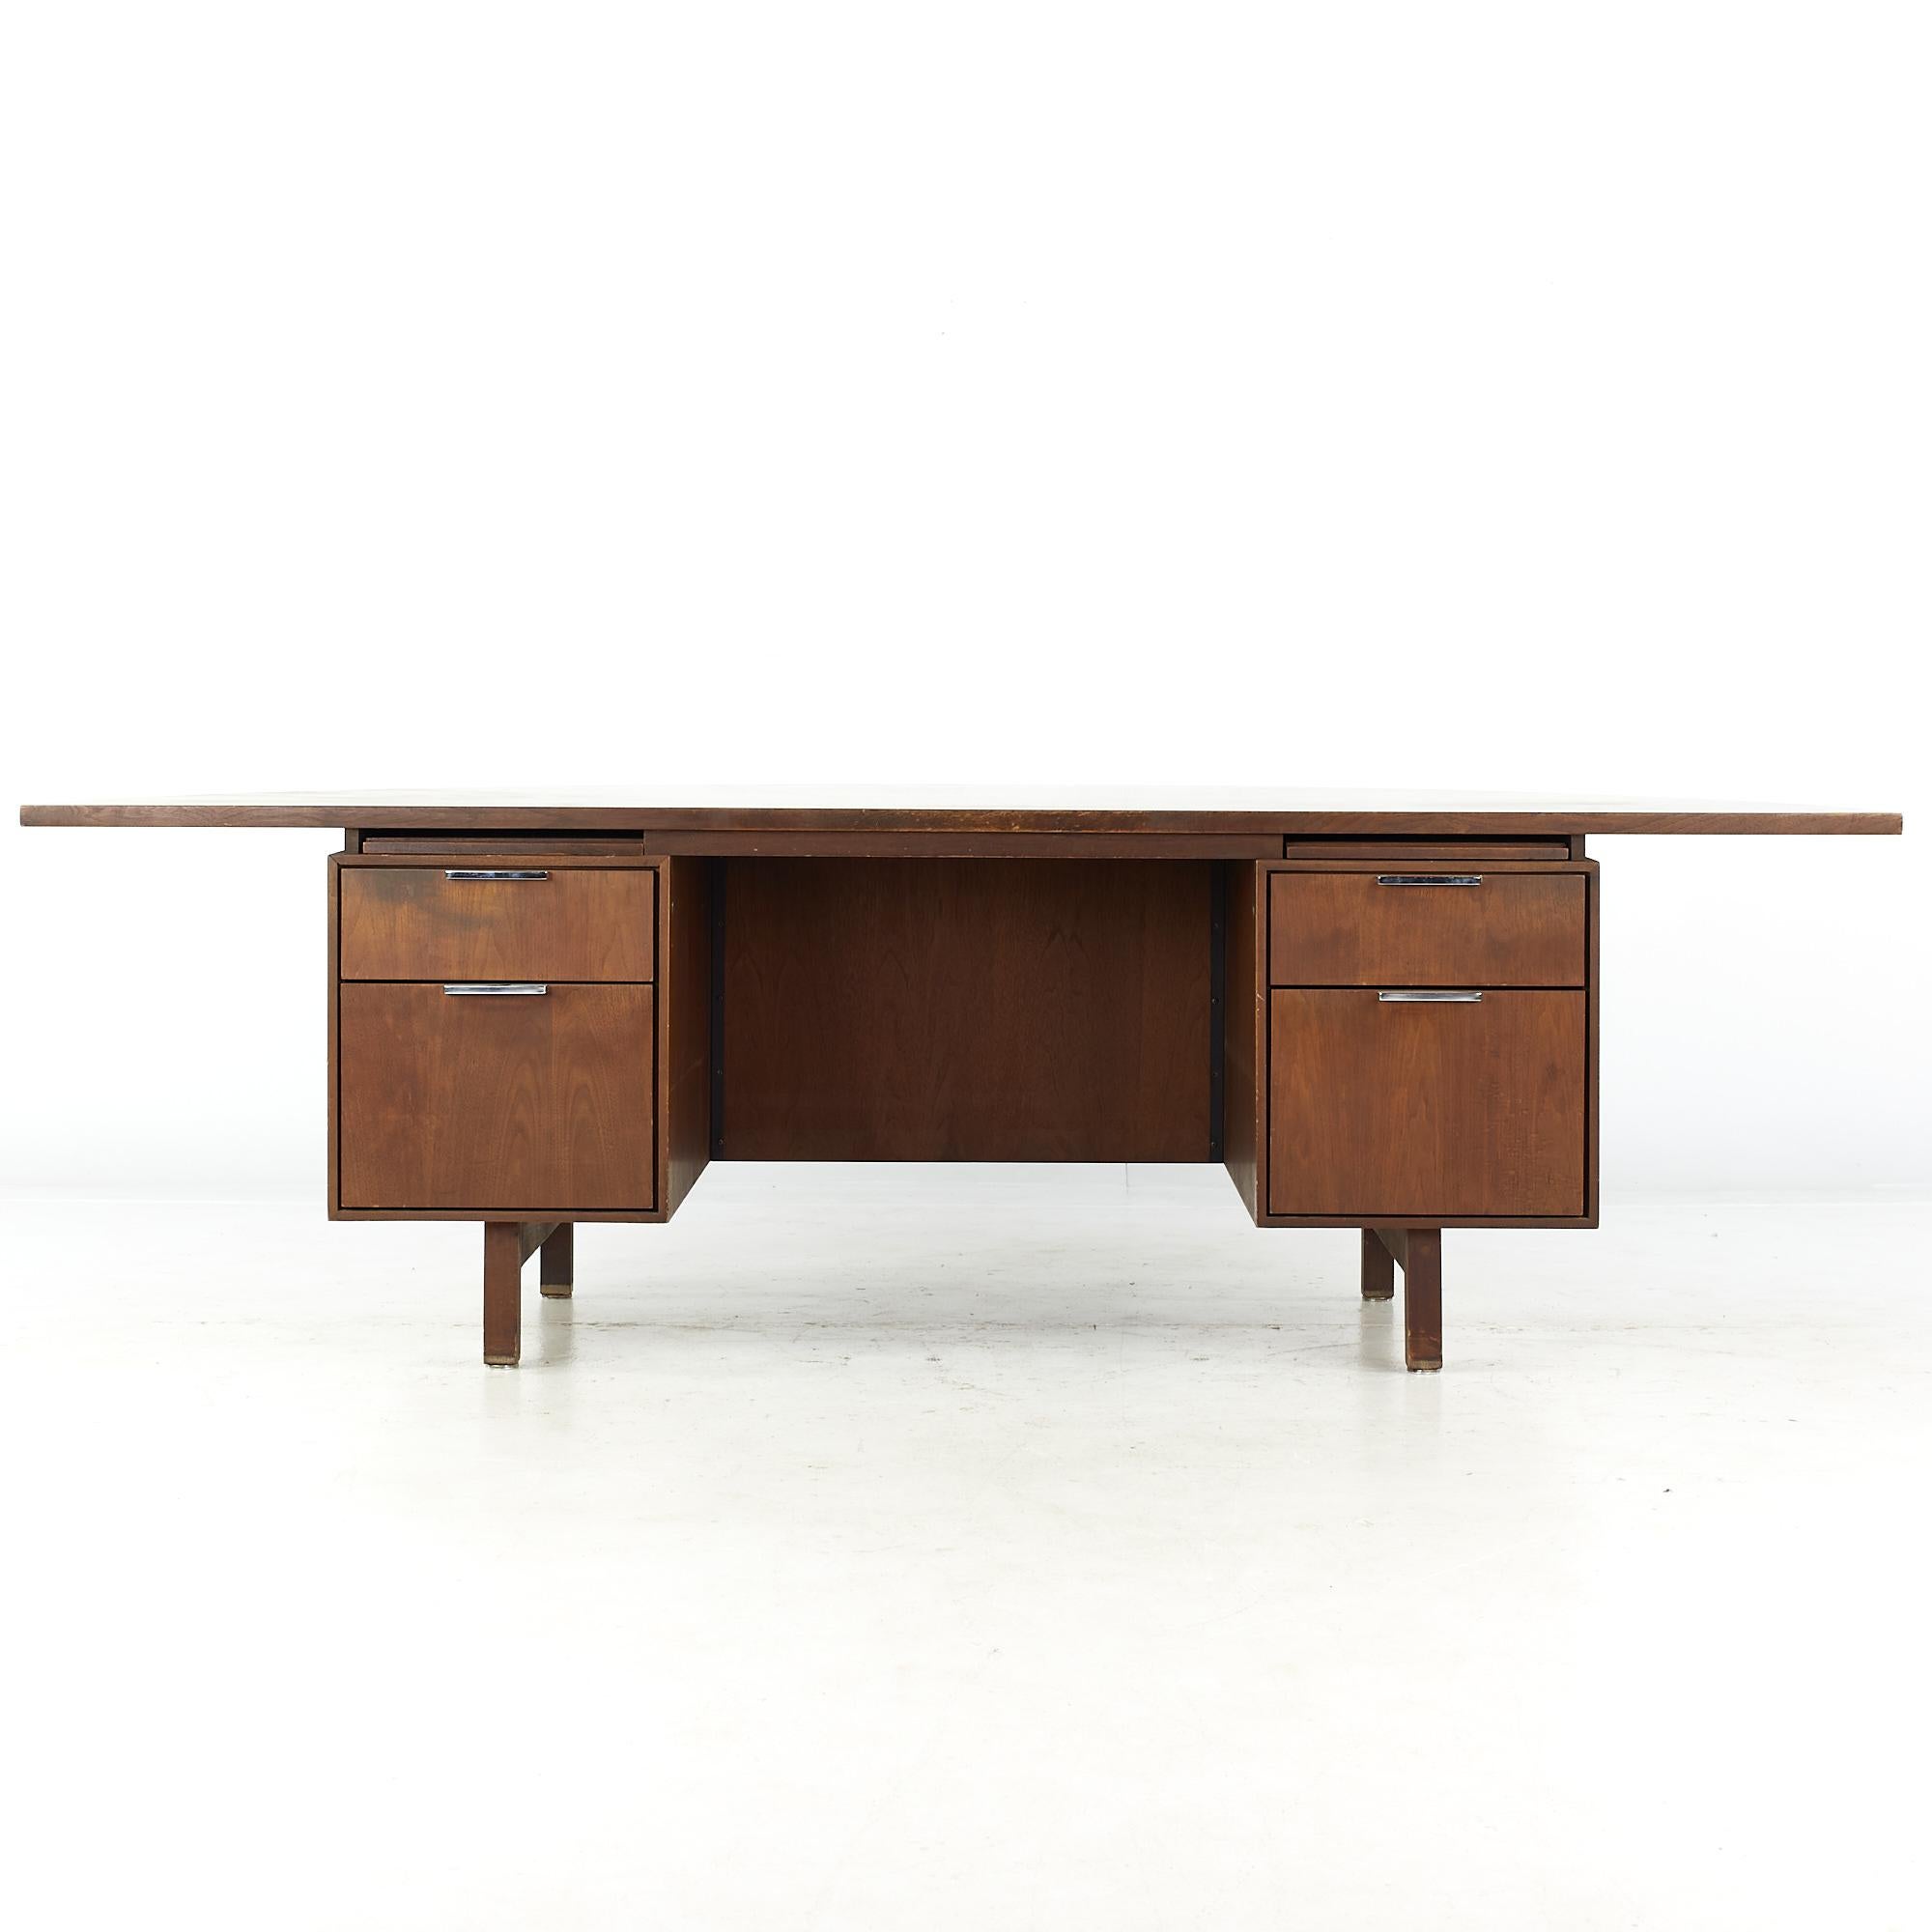 Jens Risom style mid-century half circle walnut executive desk.

This desk measures: 95.5 wide x 47.5 deep x 29 high, with a chair clearance of 26.25 inches.

All pieces of furniture can be had in what we call restored vintage condition. That